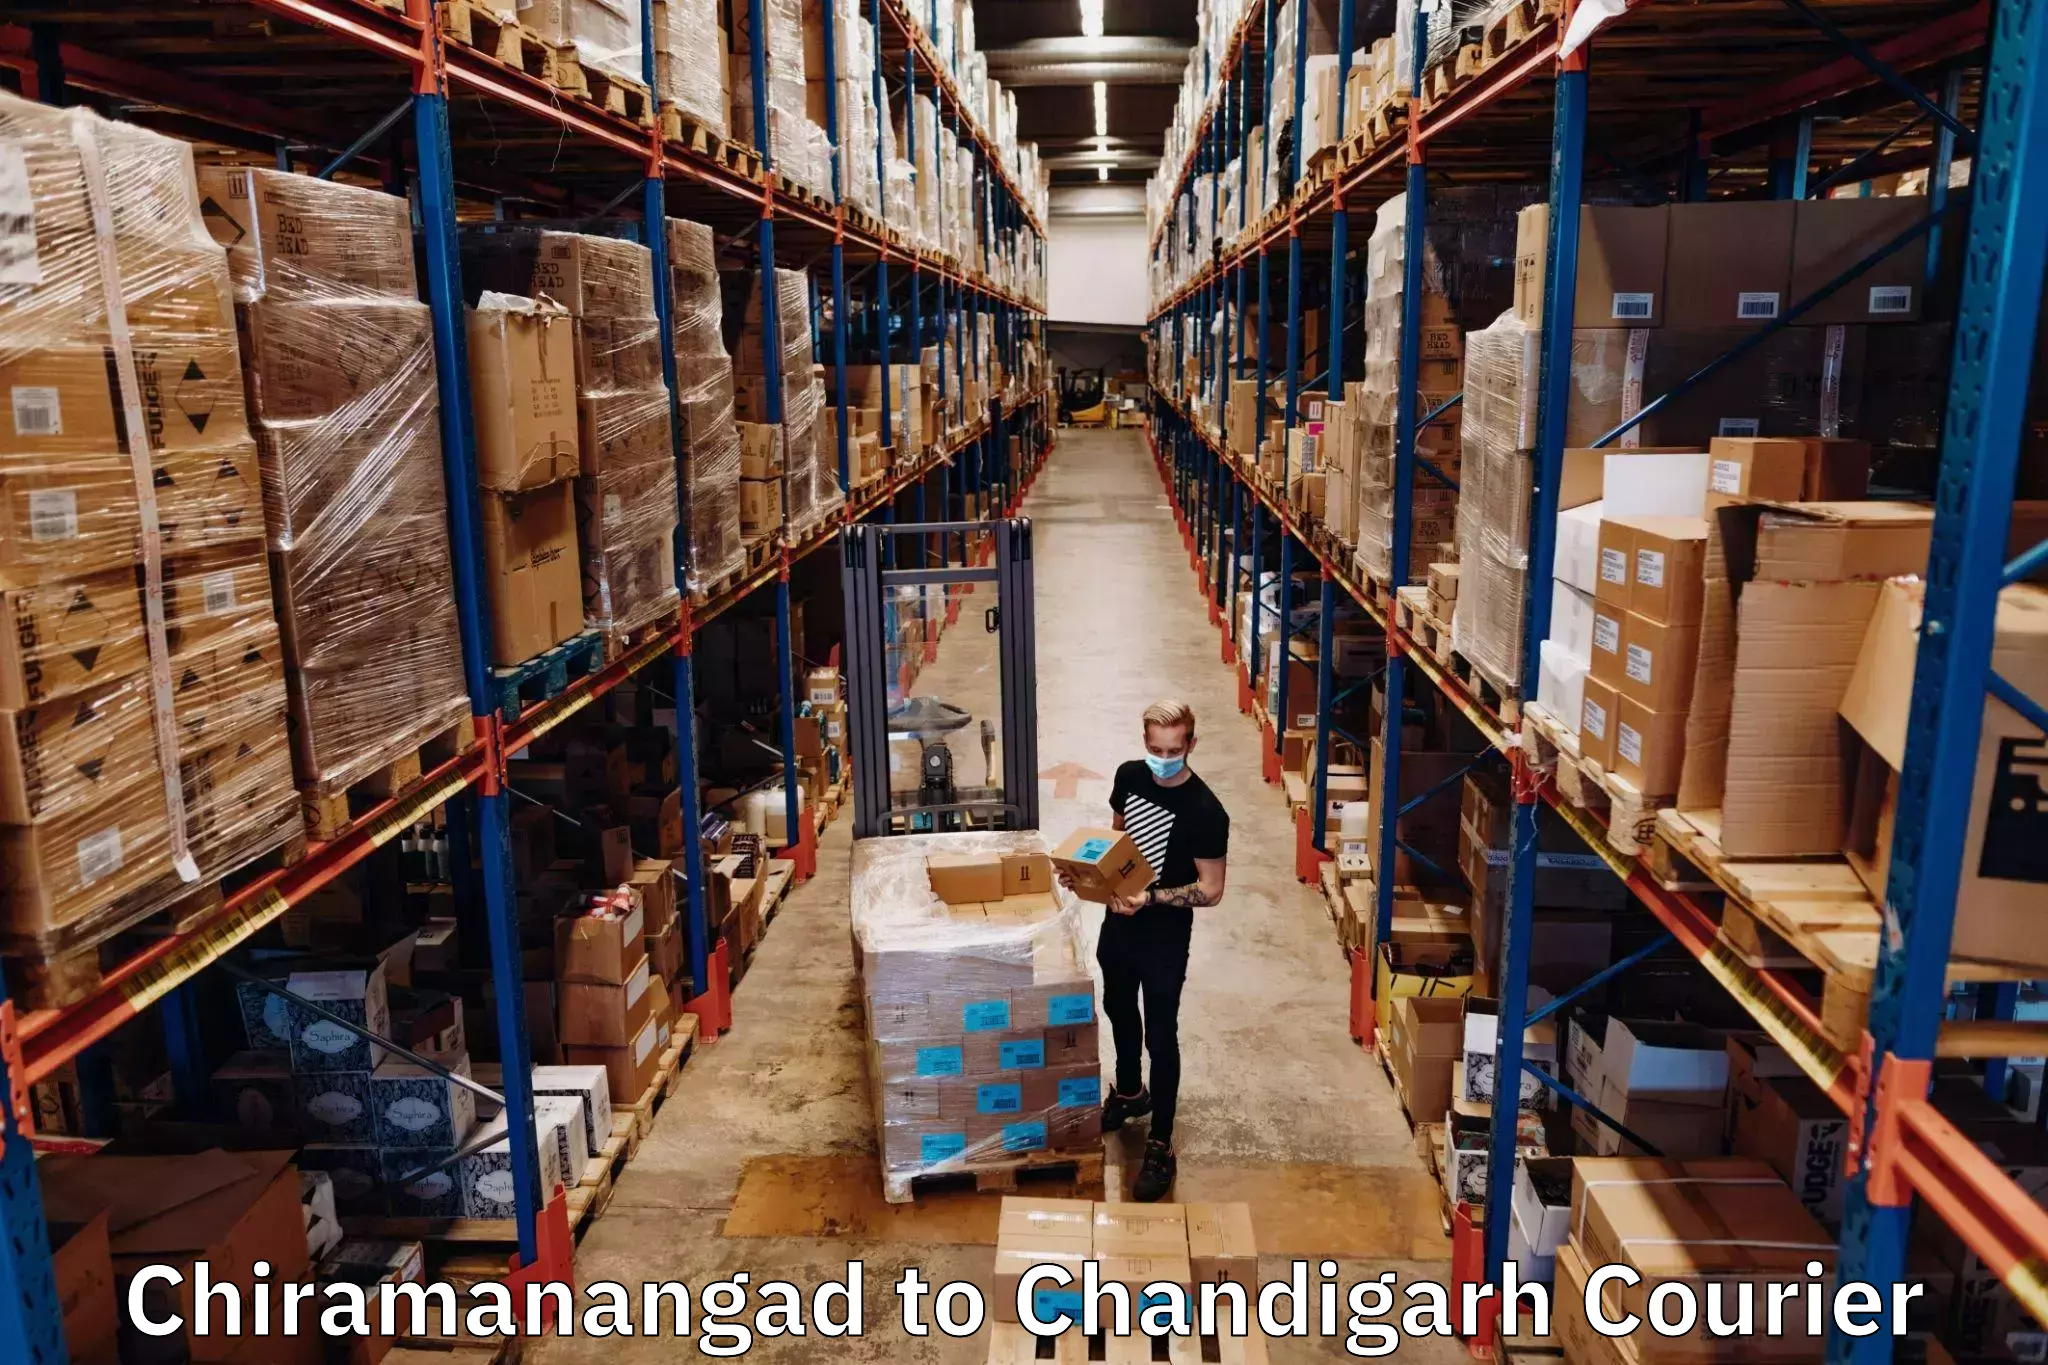 Professional courier services Chiramanangad to Chandigarh